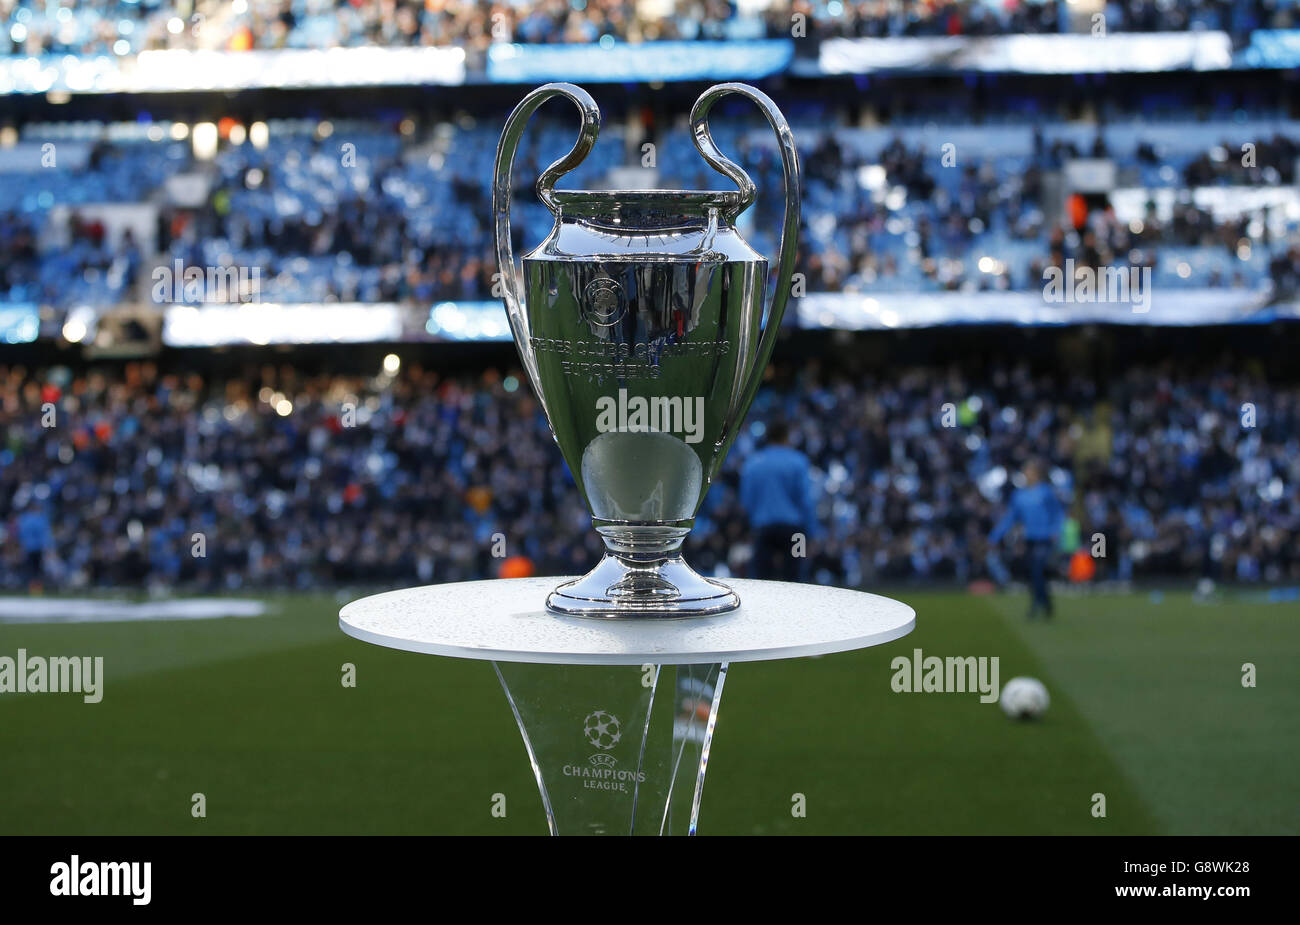 Manchester City v Real Madrid - UEFA Champions League - Semi-Final - First  Leg - Etihad Stadium. The UEFA Champions League trophy on display prior to  the UEFA Champions League, Semi-Final match